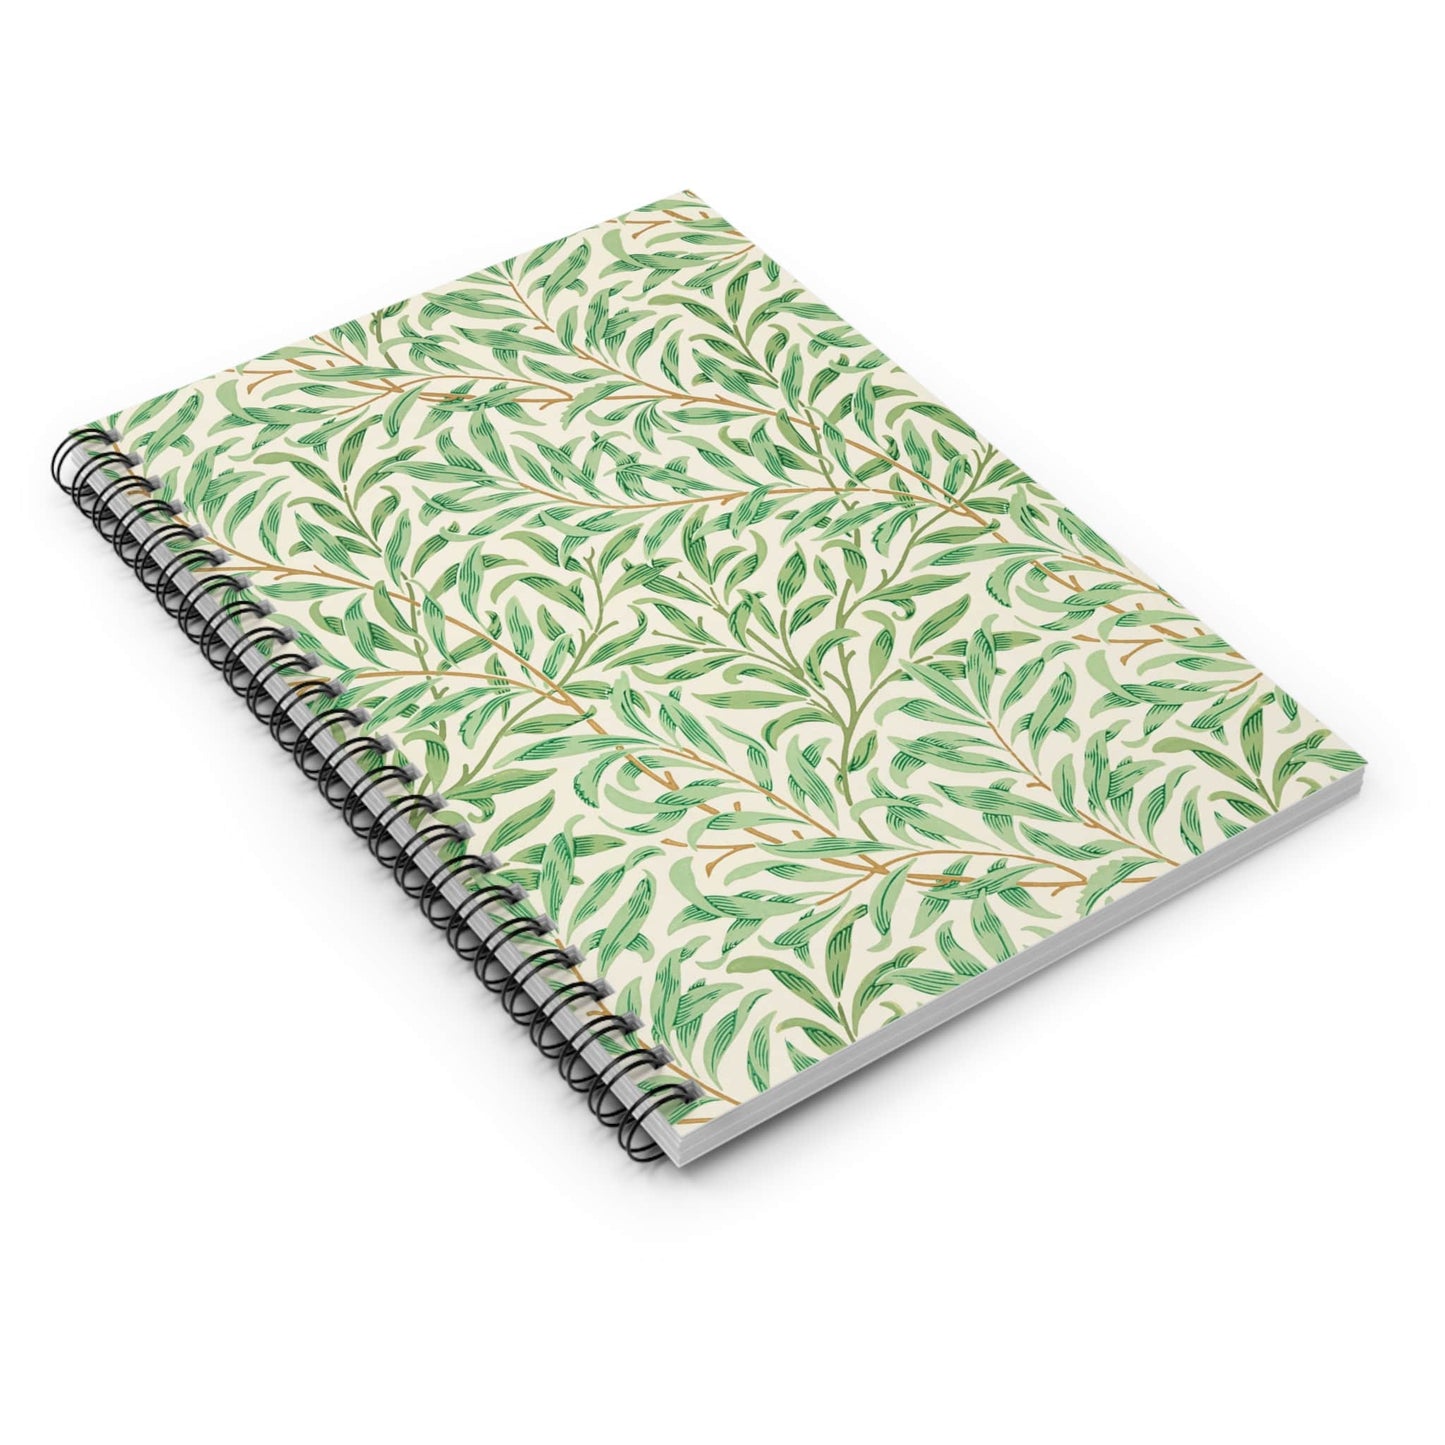 Green Leaf Spiral Notebook Laying Flat on White Surface